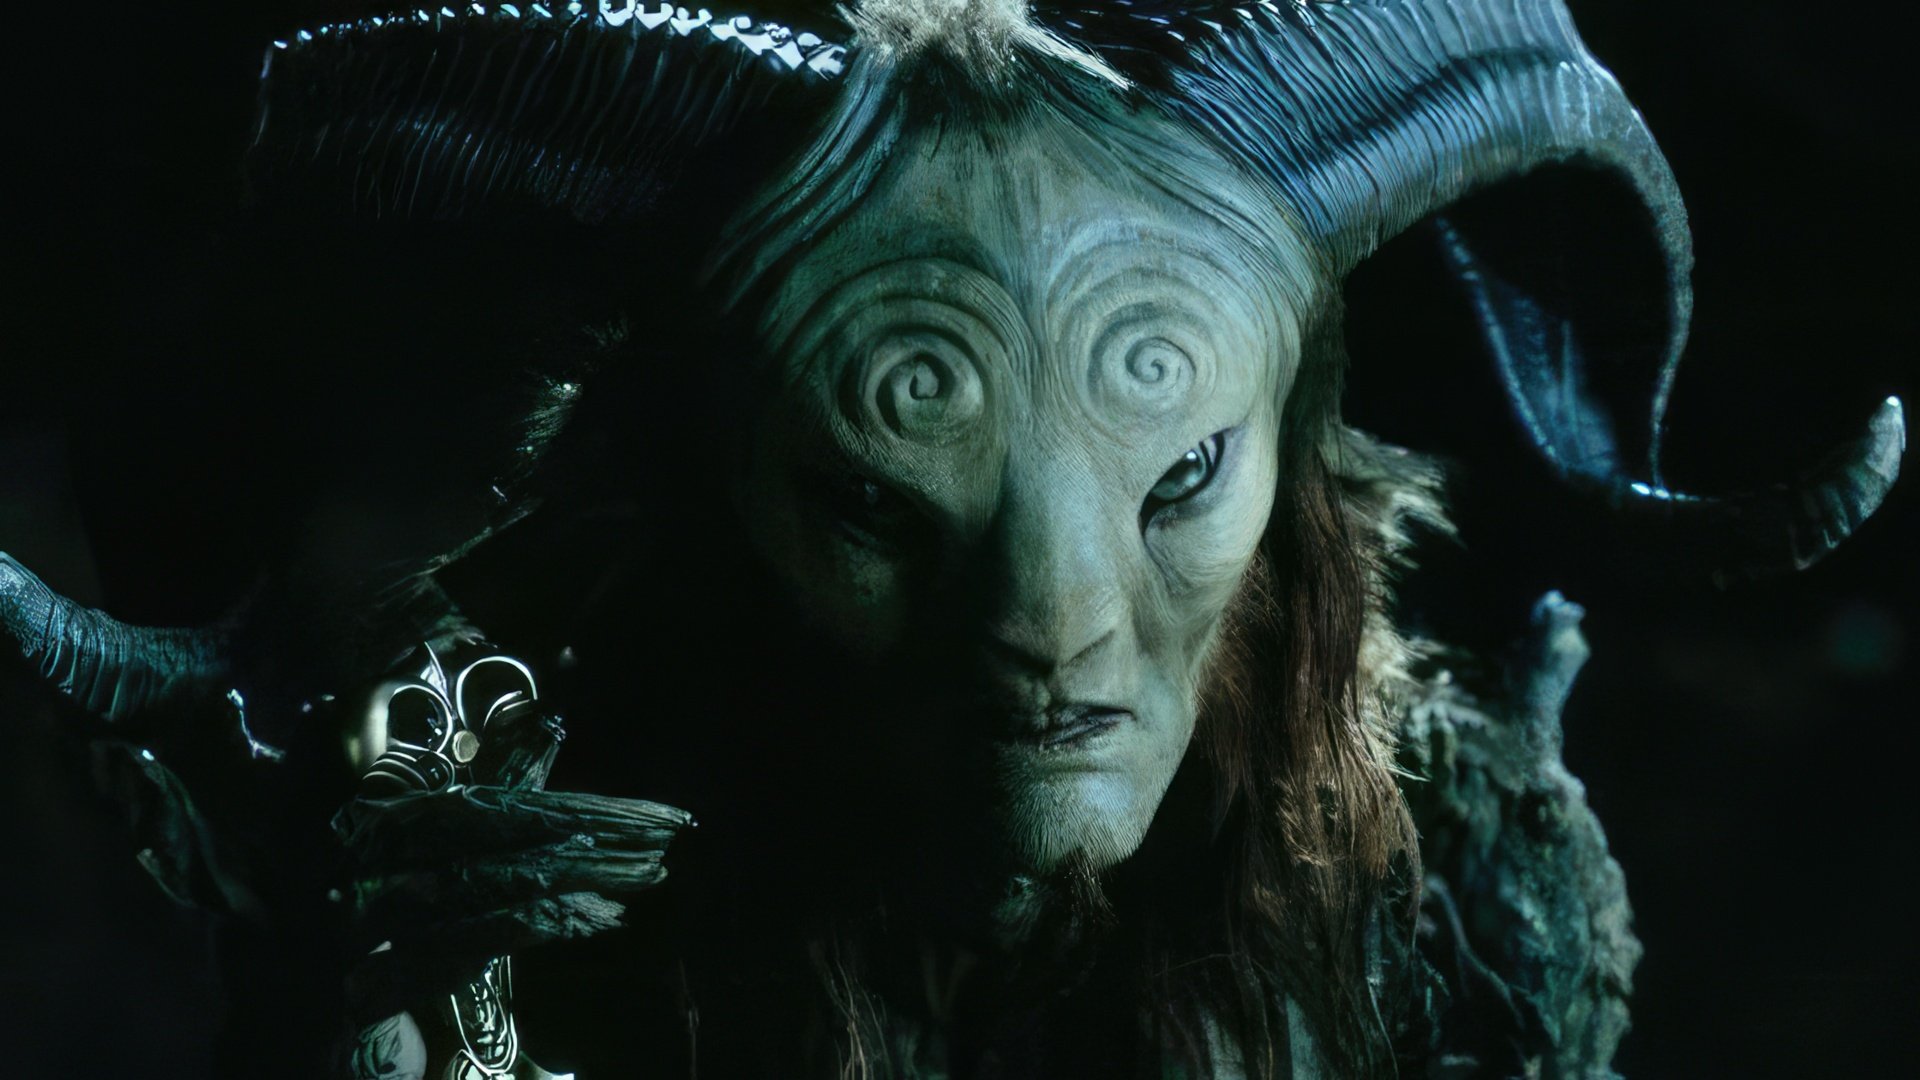 A scene from the movie 'Pan's Labyrinth'